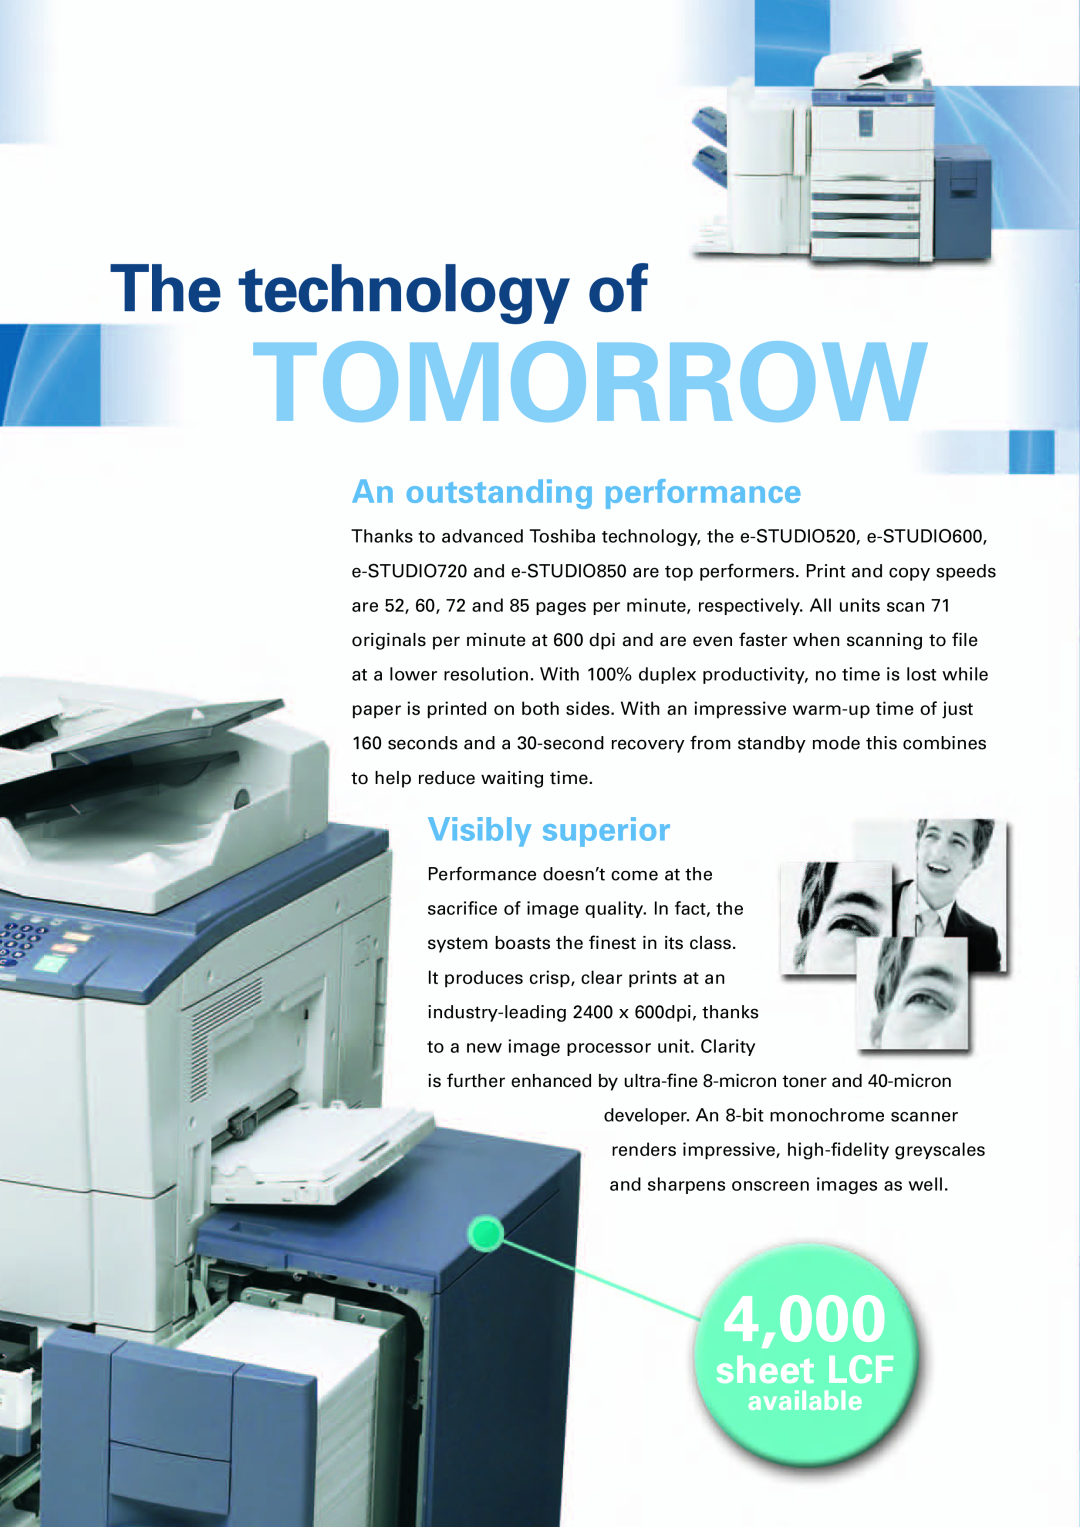 Toshiba 720, 520 Tomorrow, The technology of, 4,000, sheet LCF, An outstanding performance, Visibly superior, available 